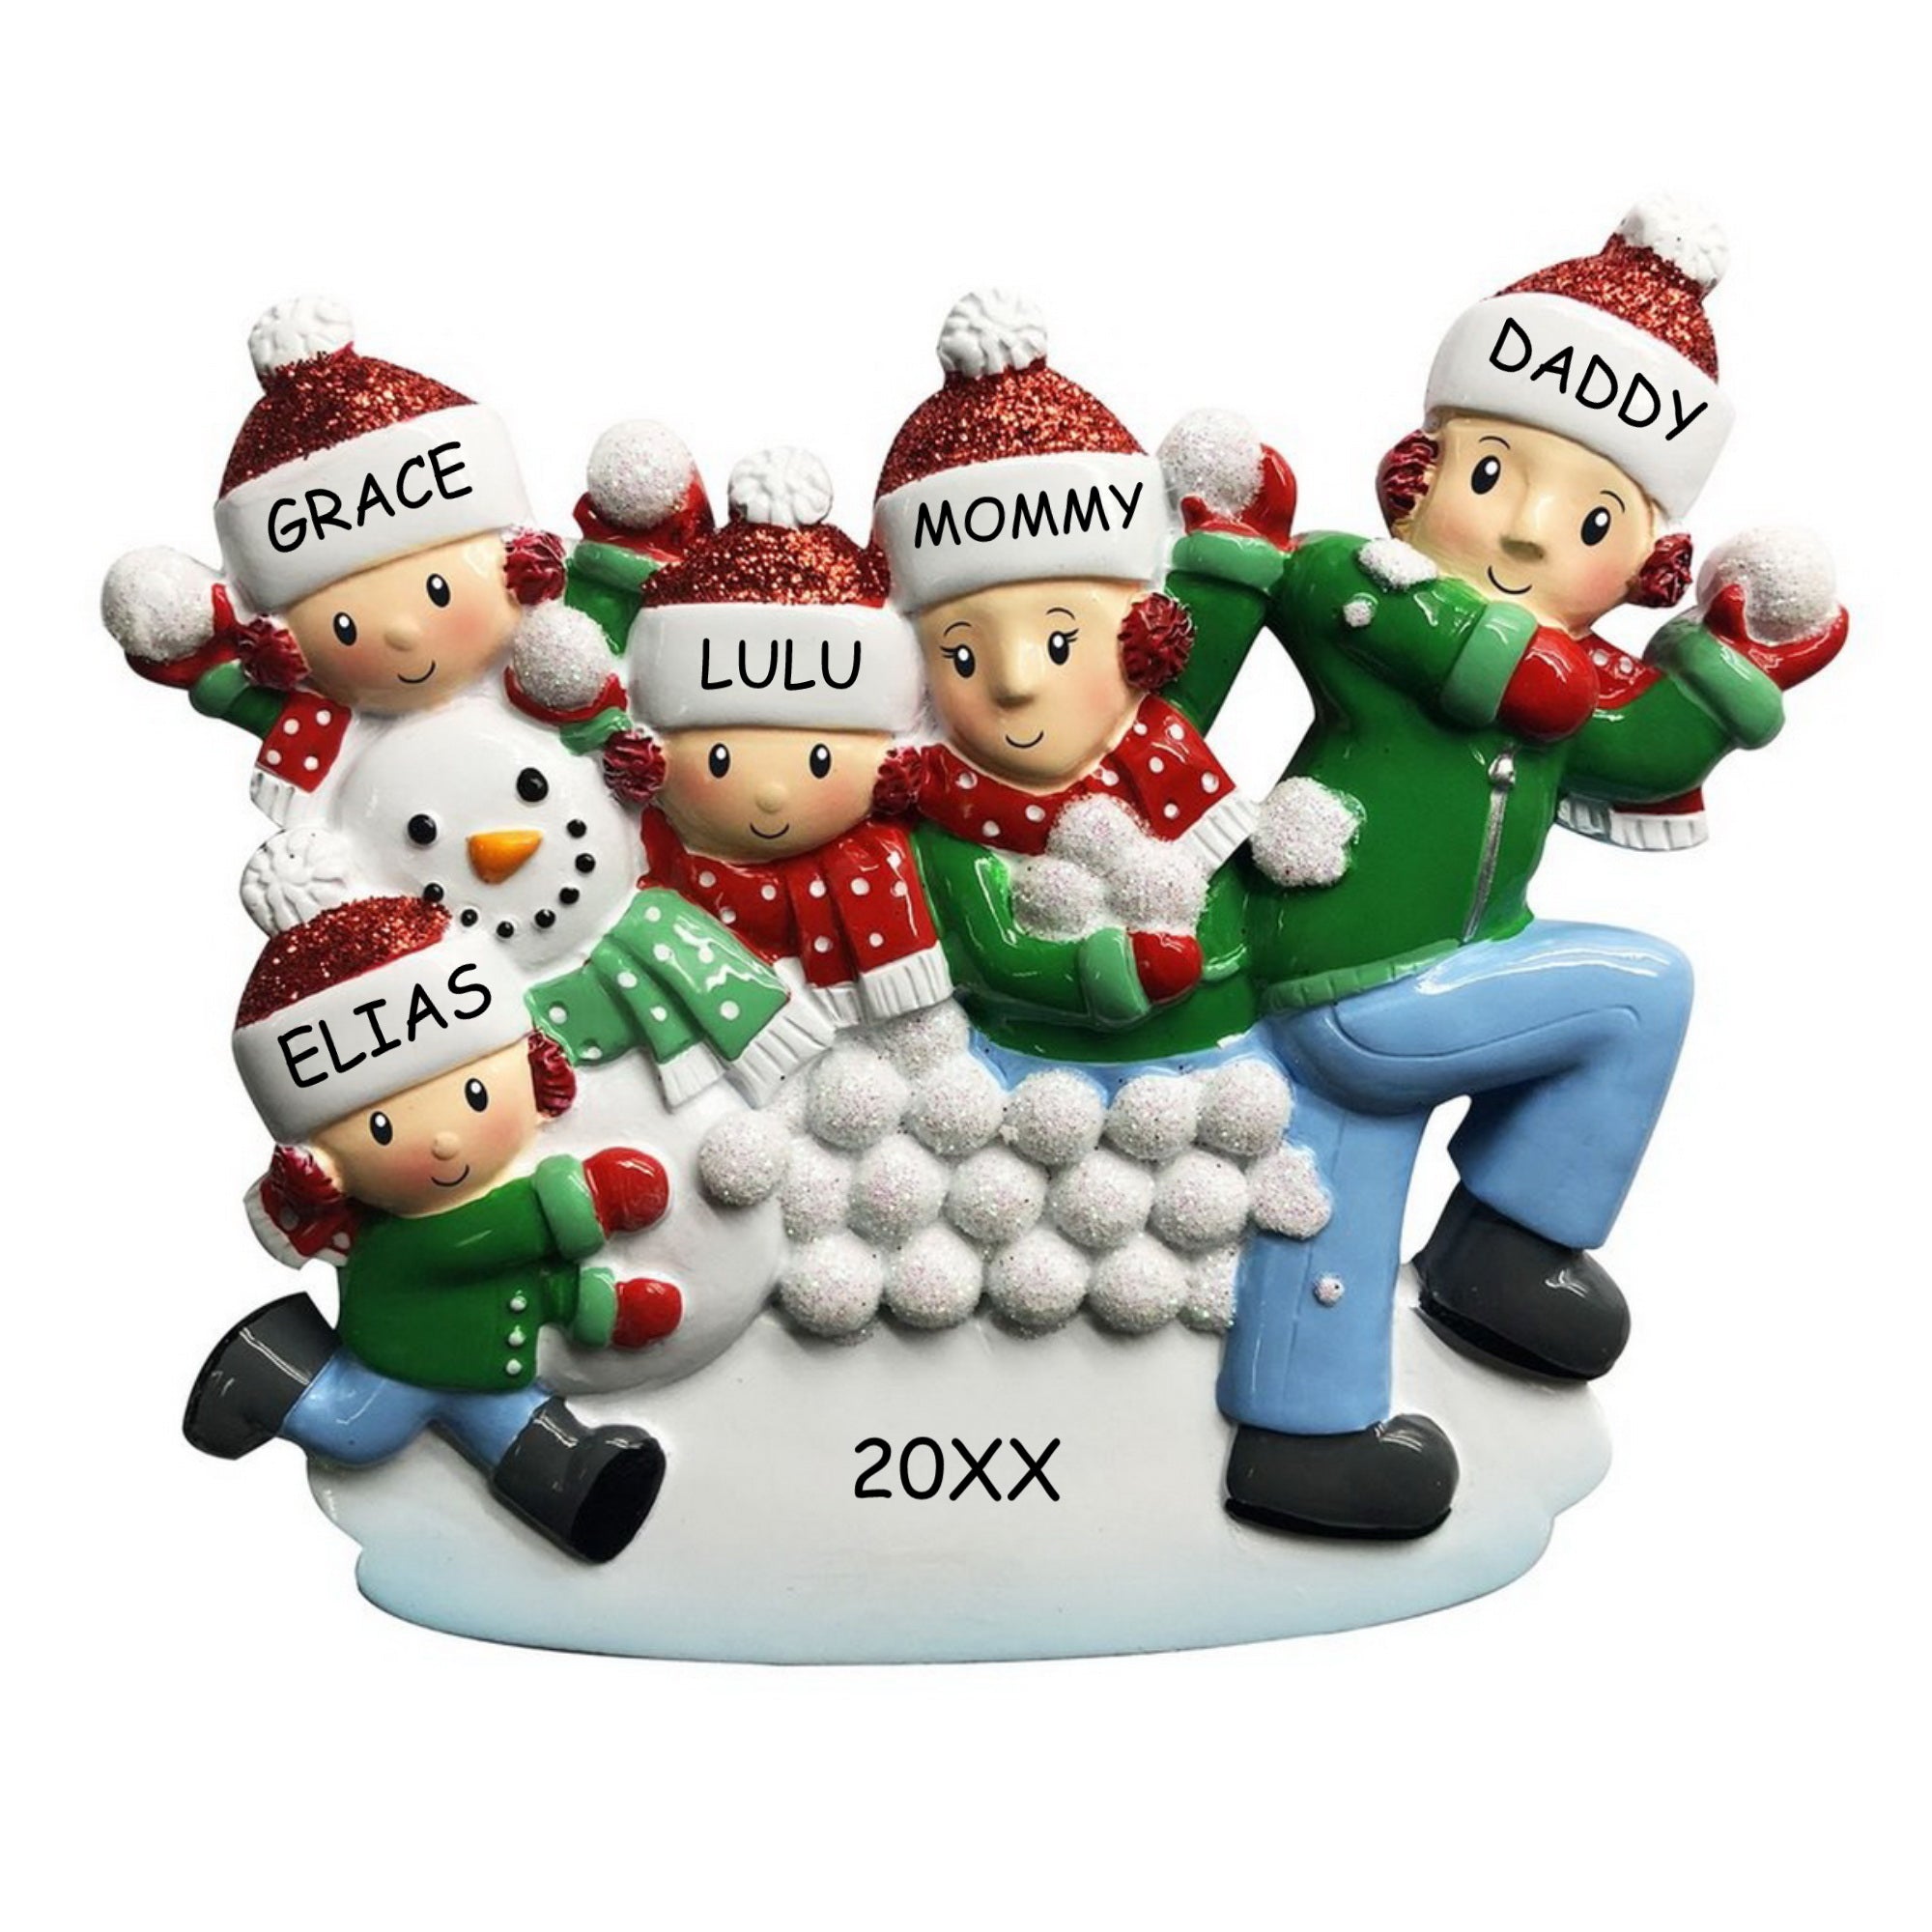 Personalized Snowball Fun Family Christmas Ornament - Family of 5